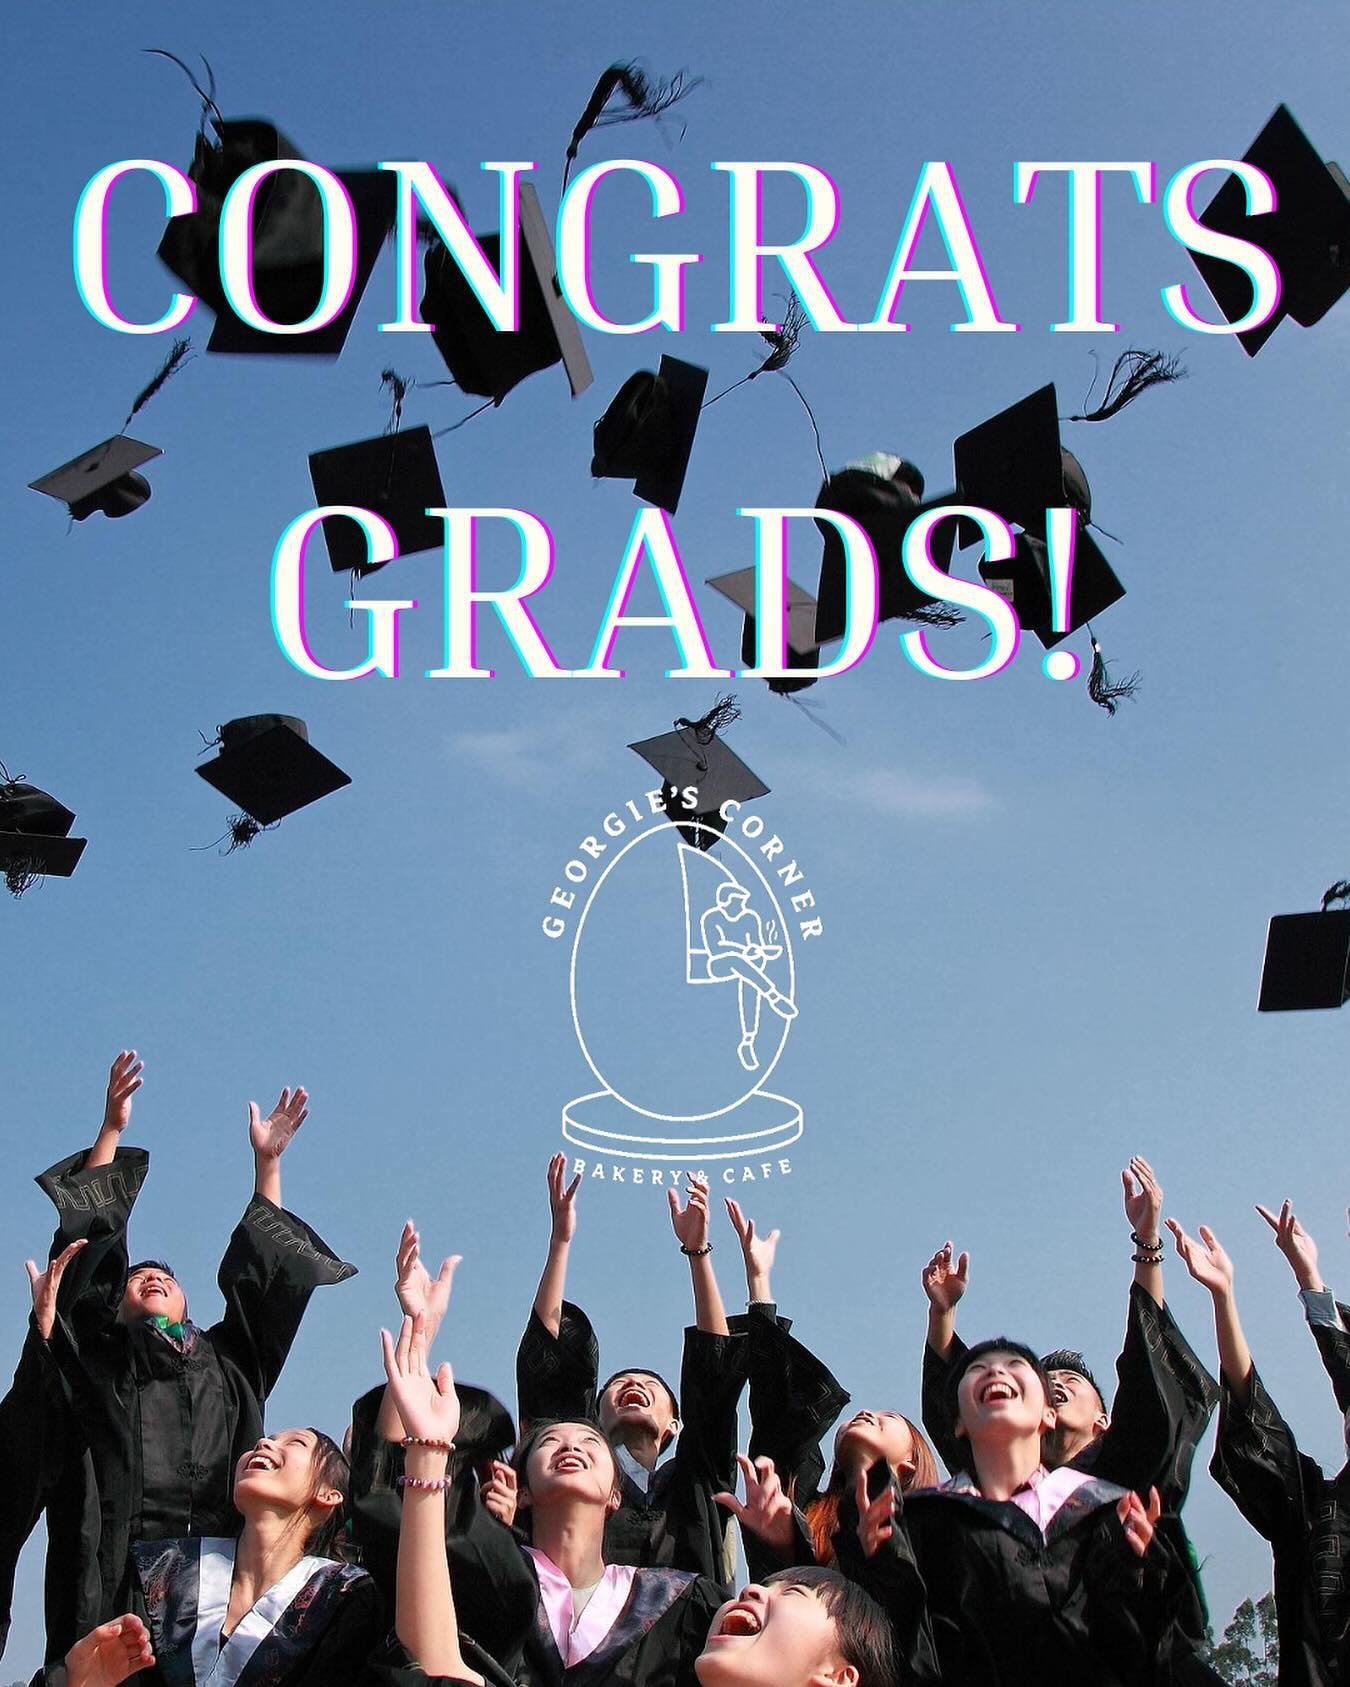 Congratulations to all the students graduating over the next few weekends from all the schools in the area! Special congrats to our team members who are graduating! We&rsquo;re so proud!! 🥲